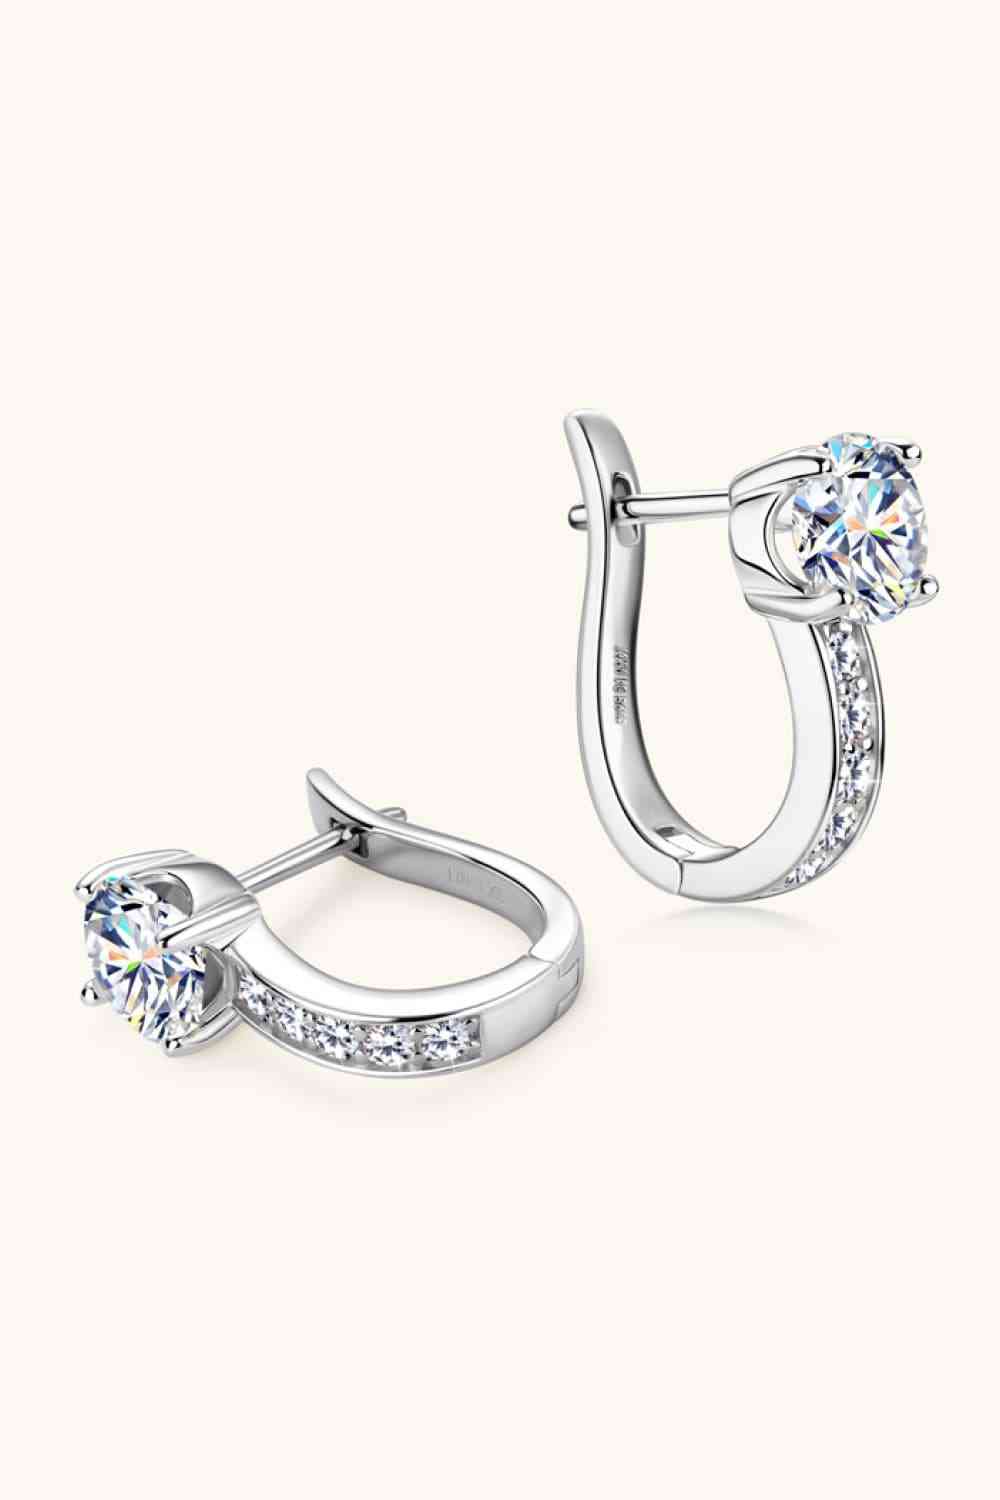 2 Carat Moissanite 925 Sterling Silver Earrings - Shop Tophatter Deals, Electronics, Fashion, Jewelry, Health, Beauty, Home Decor, Free Shipping